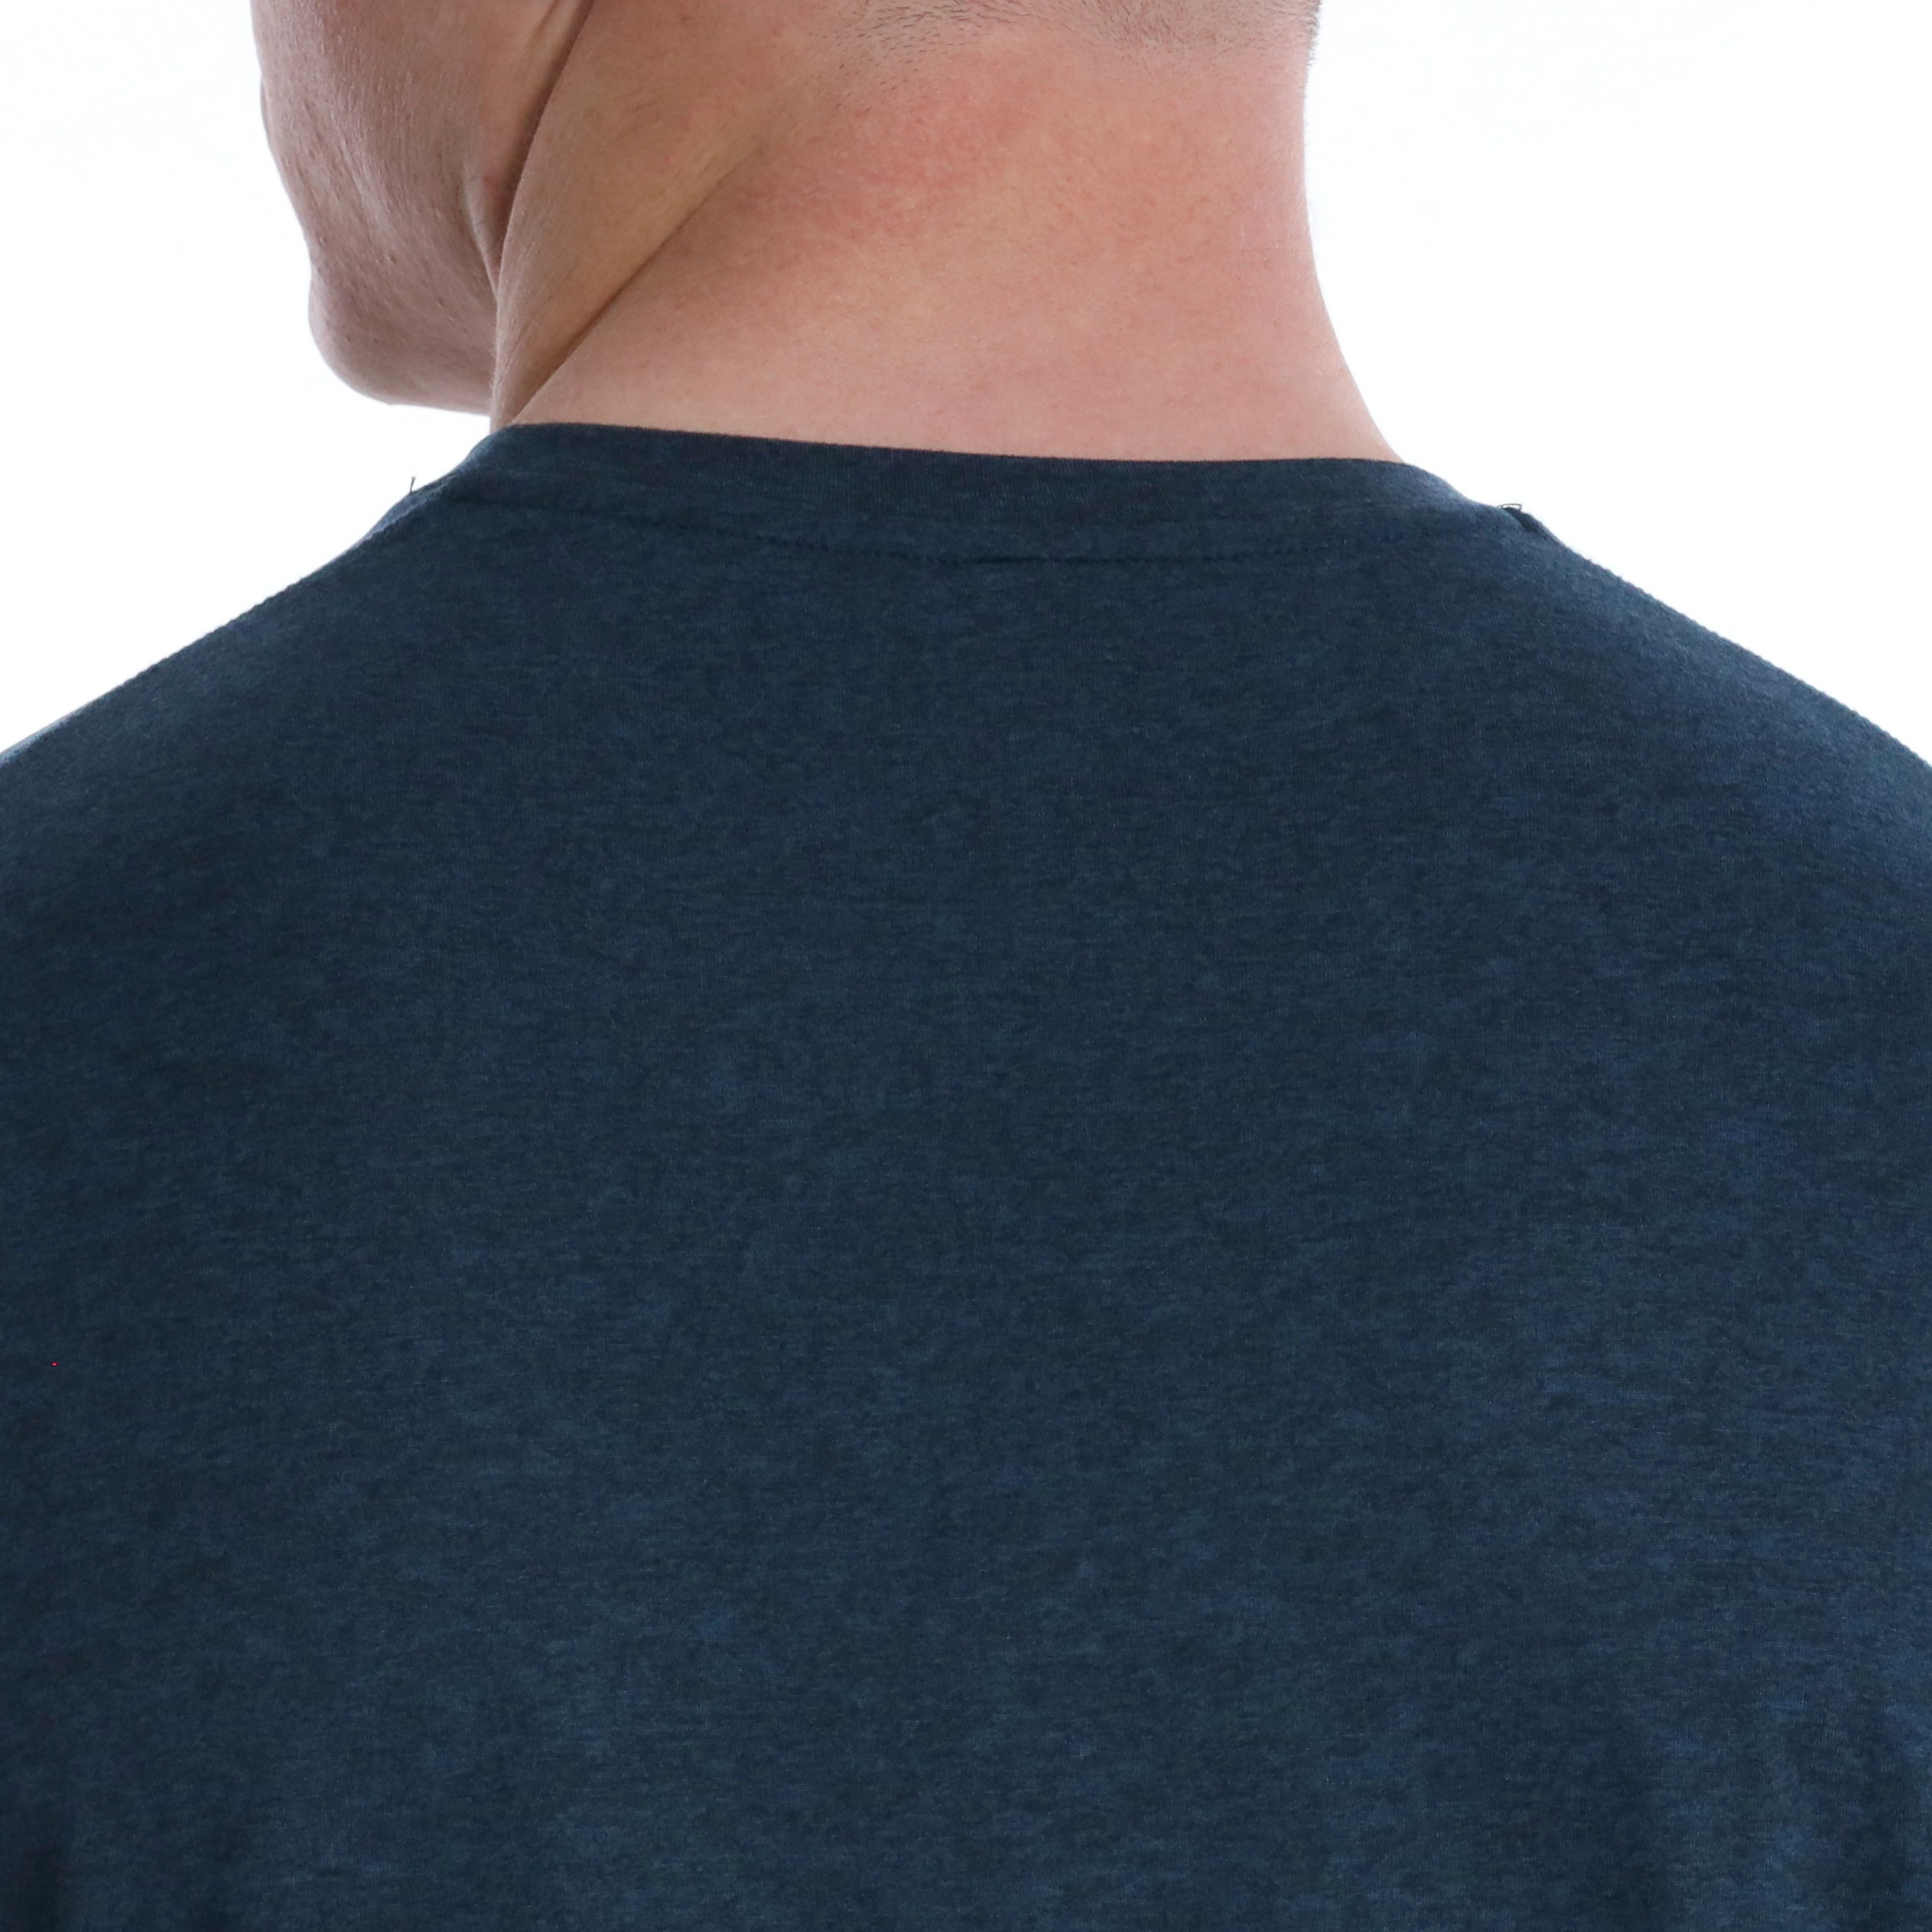 Butter T Looper Silhouette - Navy Heather